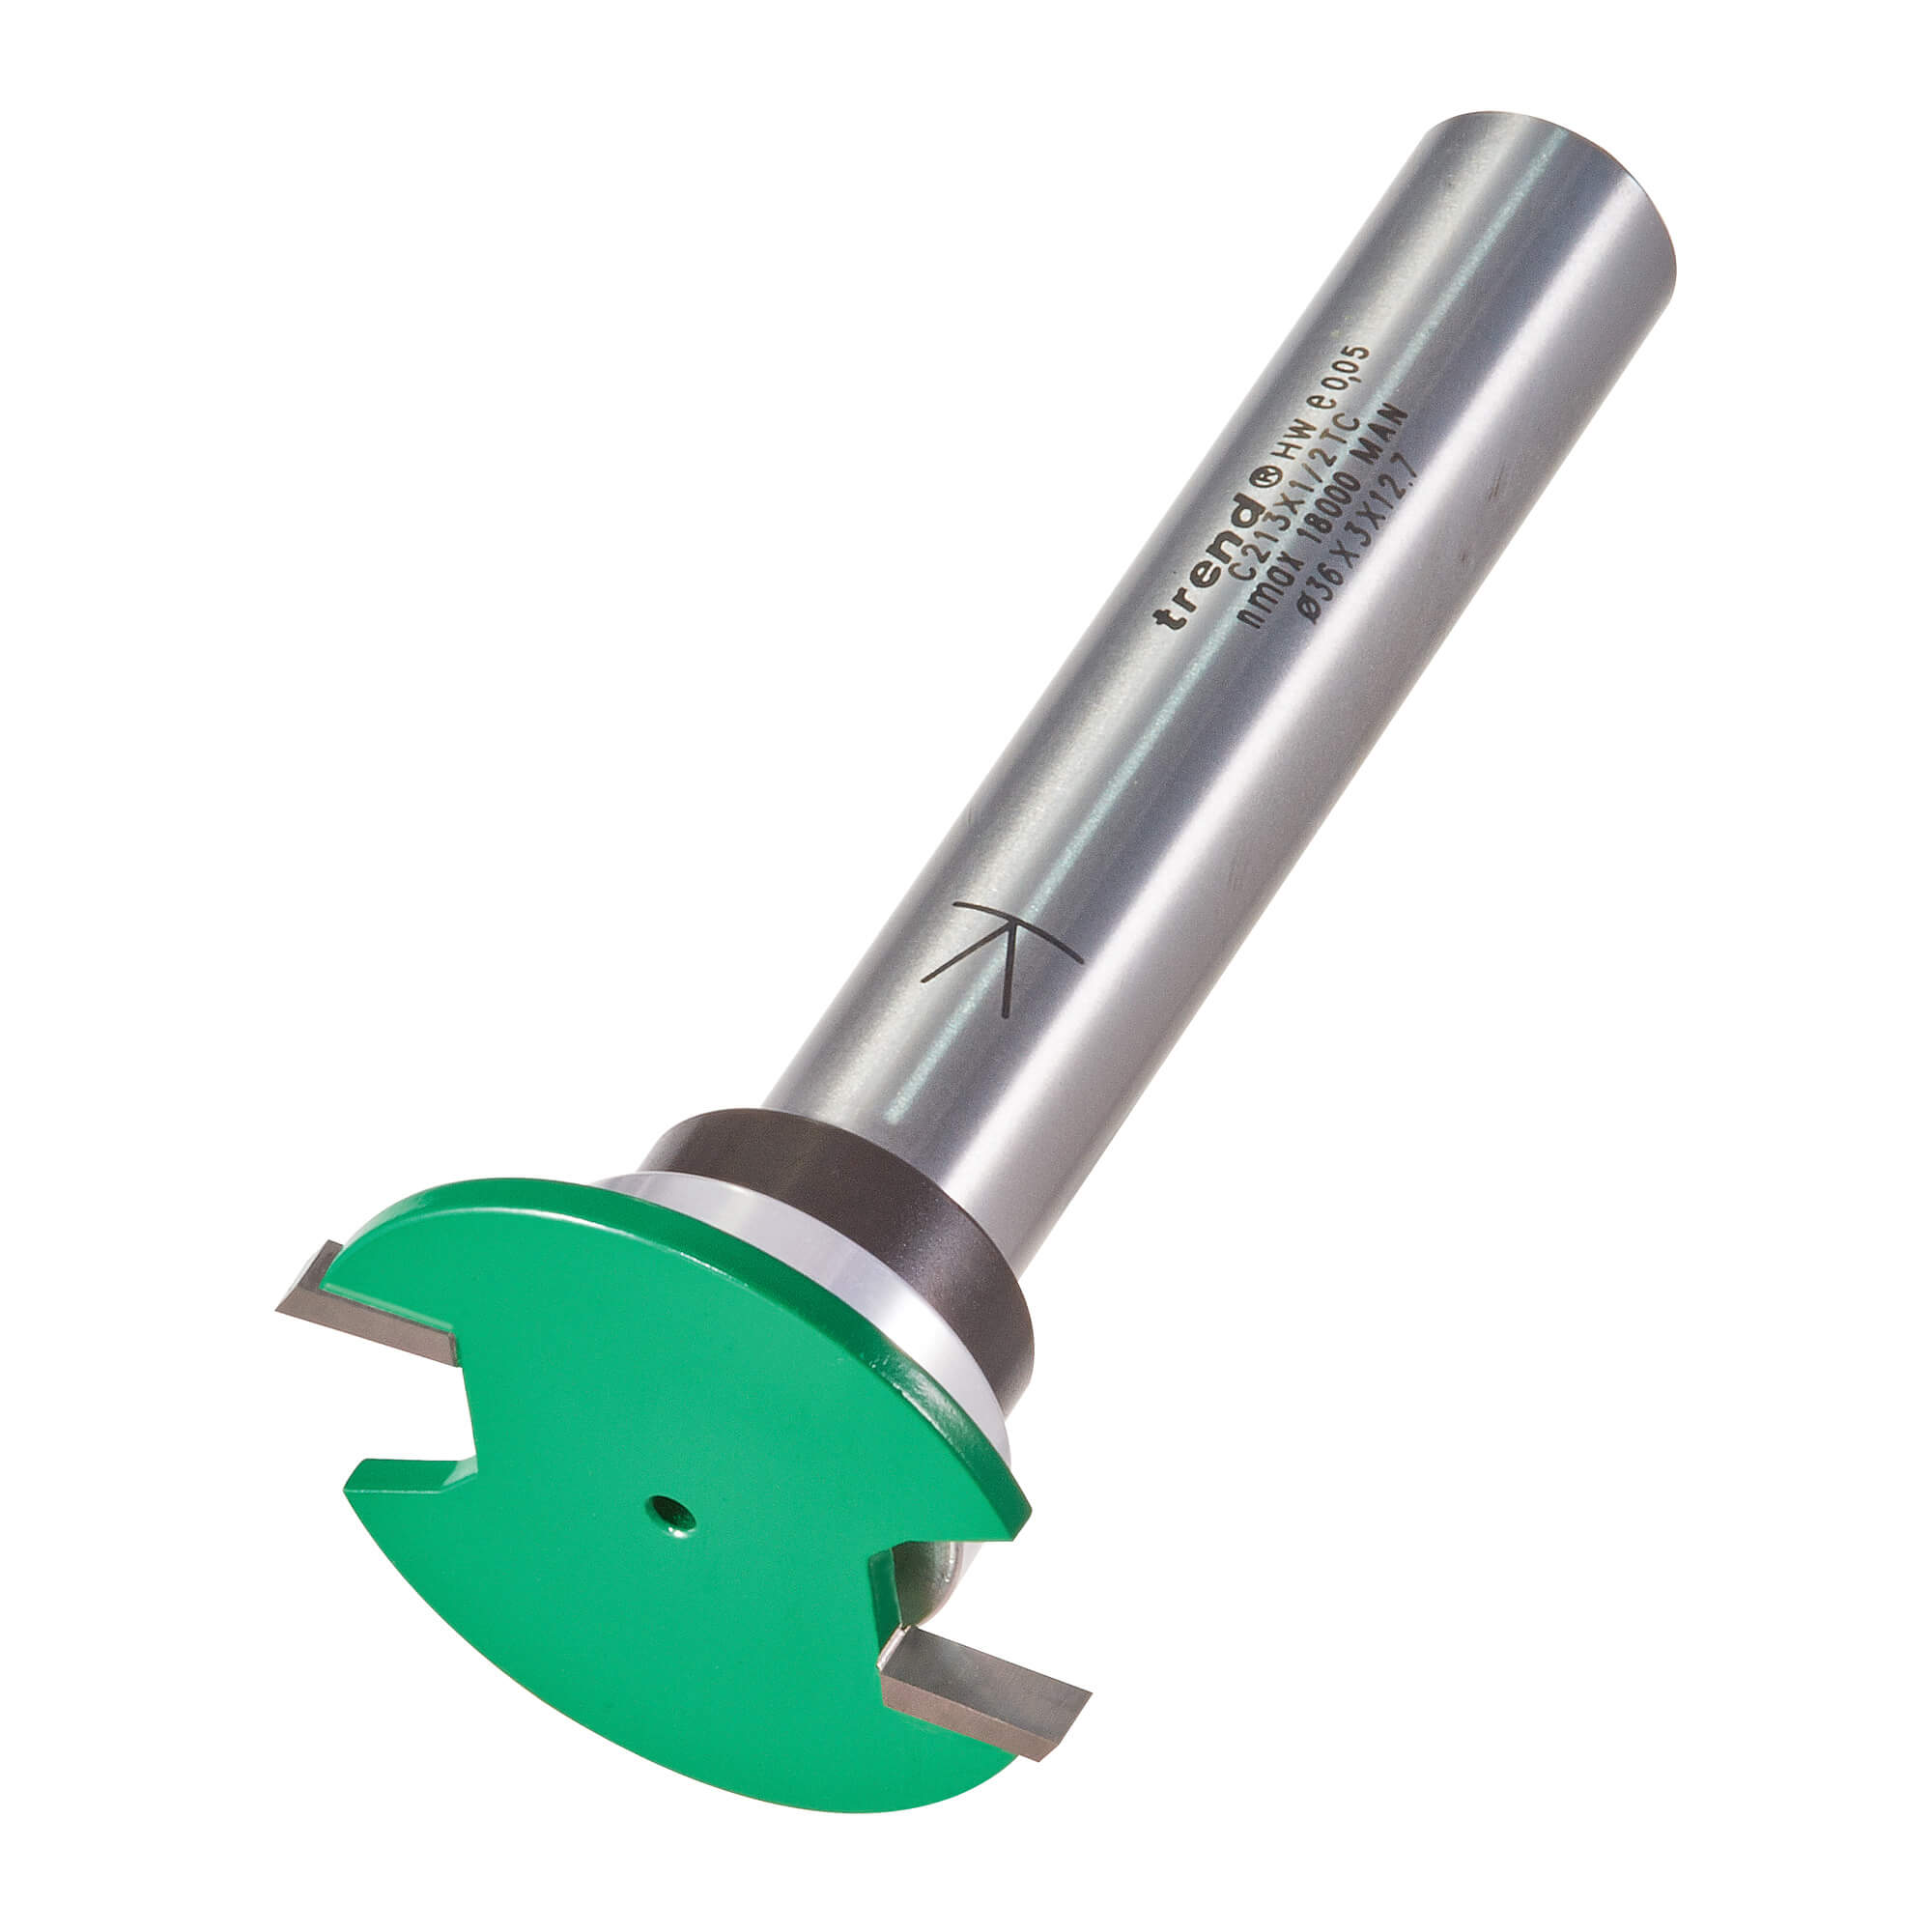 Image of Trend CRAFTPRO Weatherseal Groover Router Cutter 36mm 3mm 1/2"